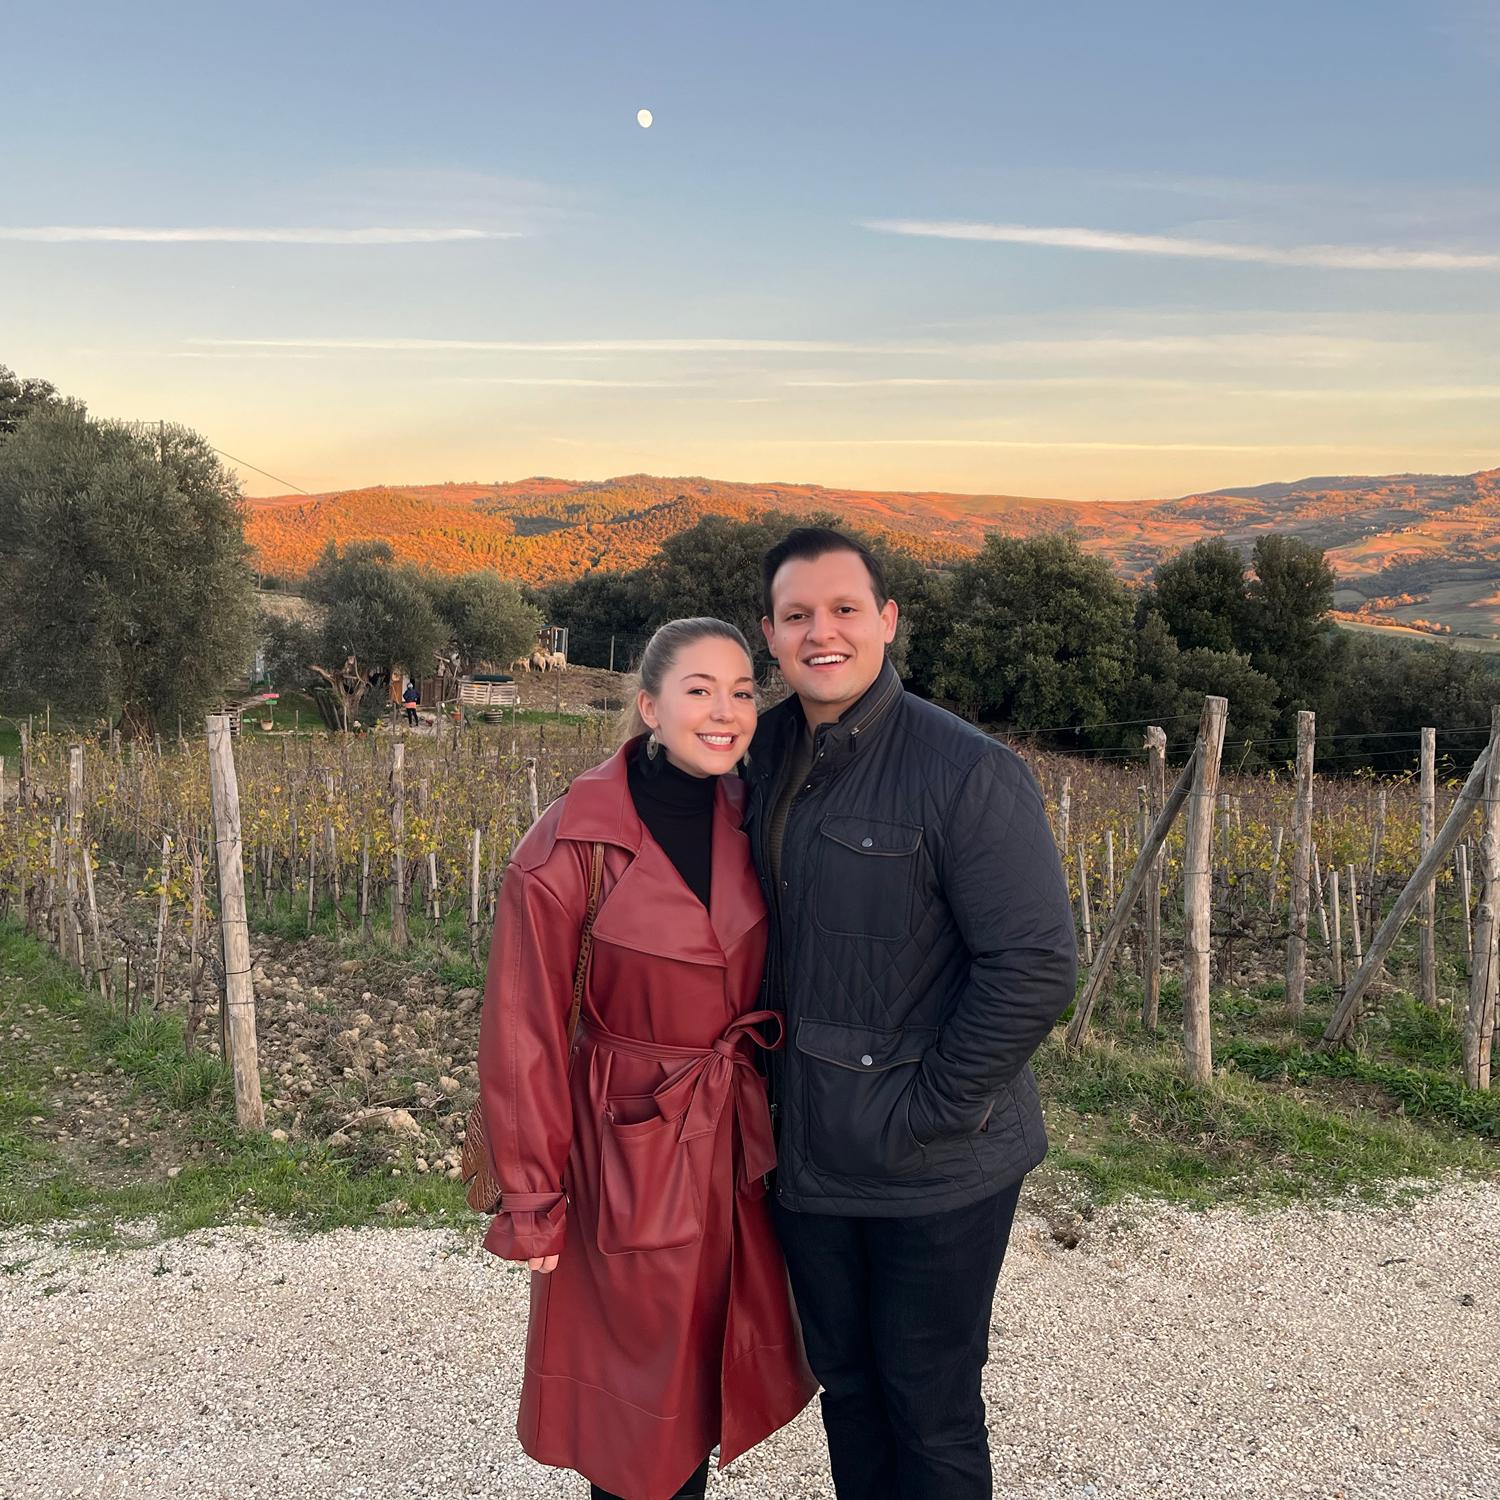 Exploring Tuscany in celebration of our 5 year anniversary!